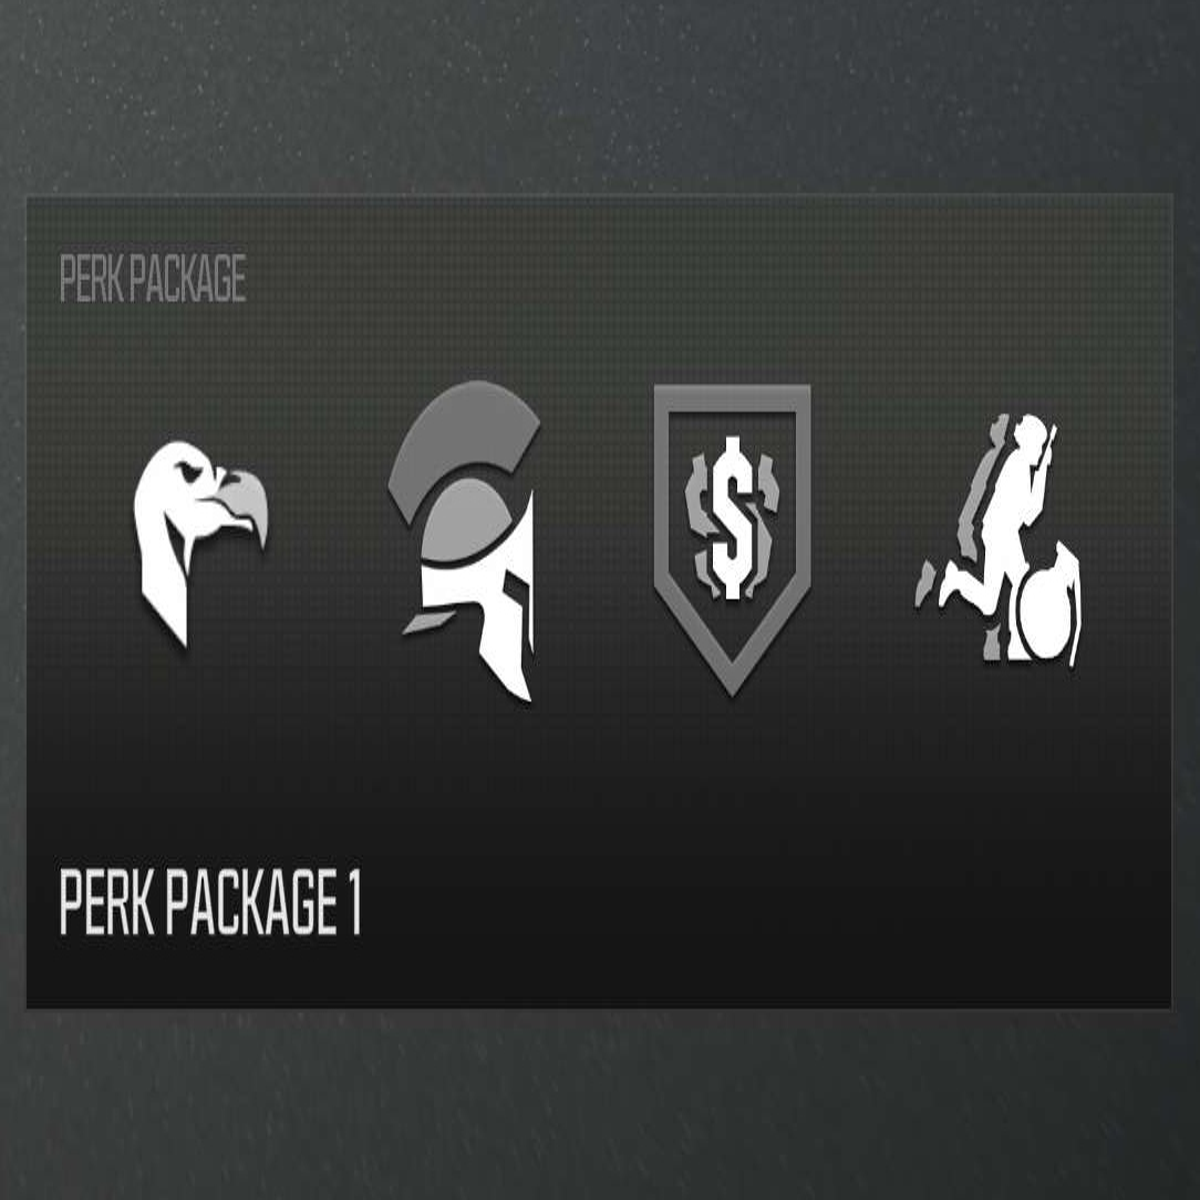 Is it just me, or does anyone else absolutely never put perks into